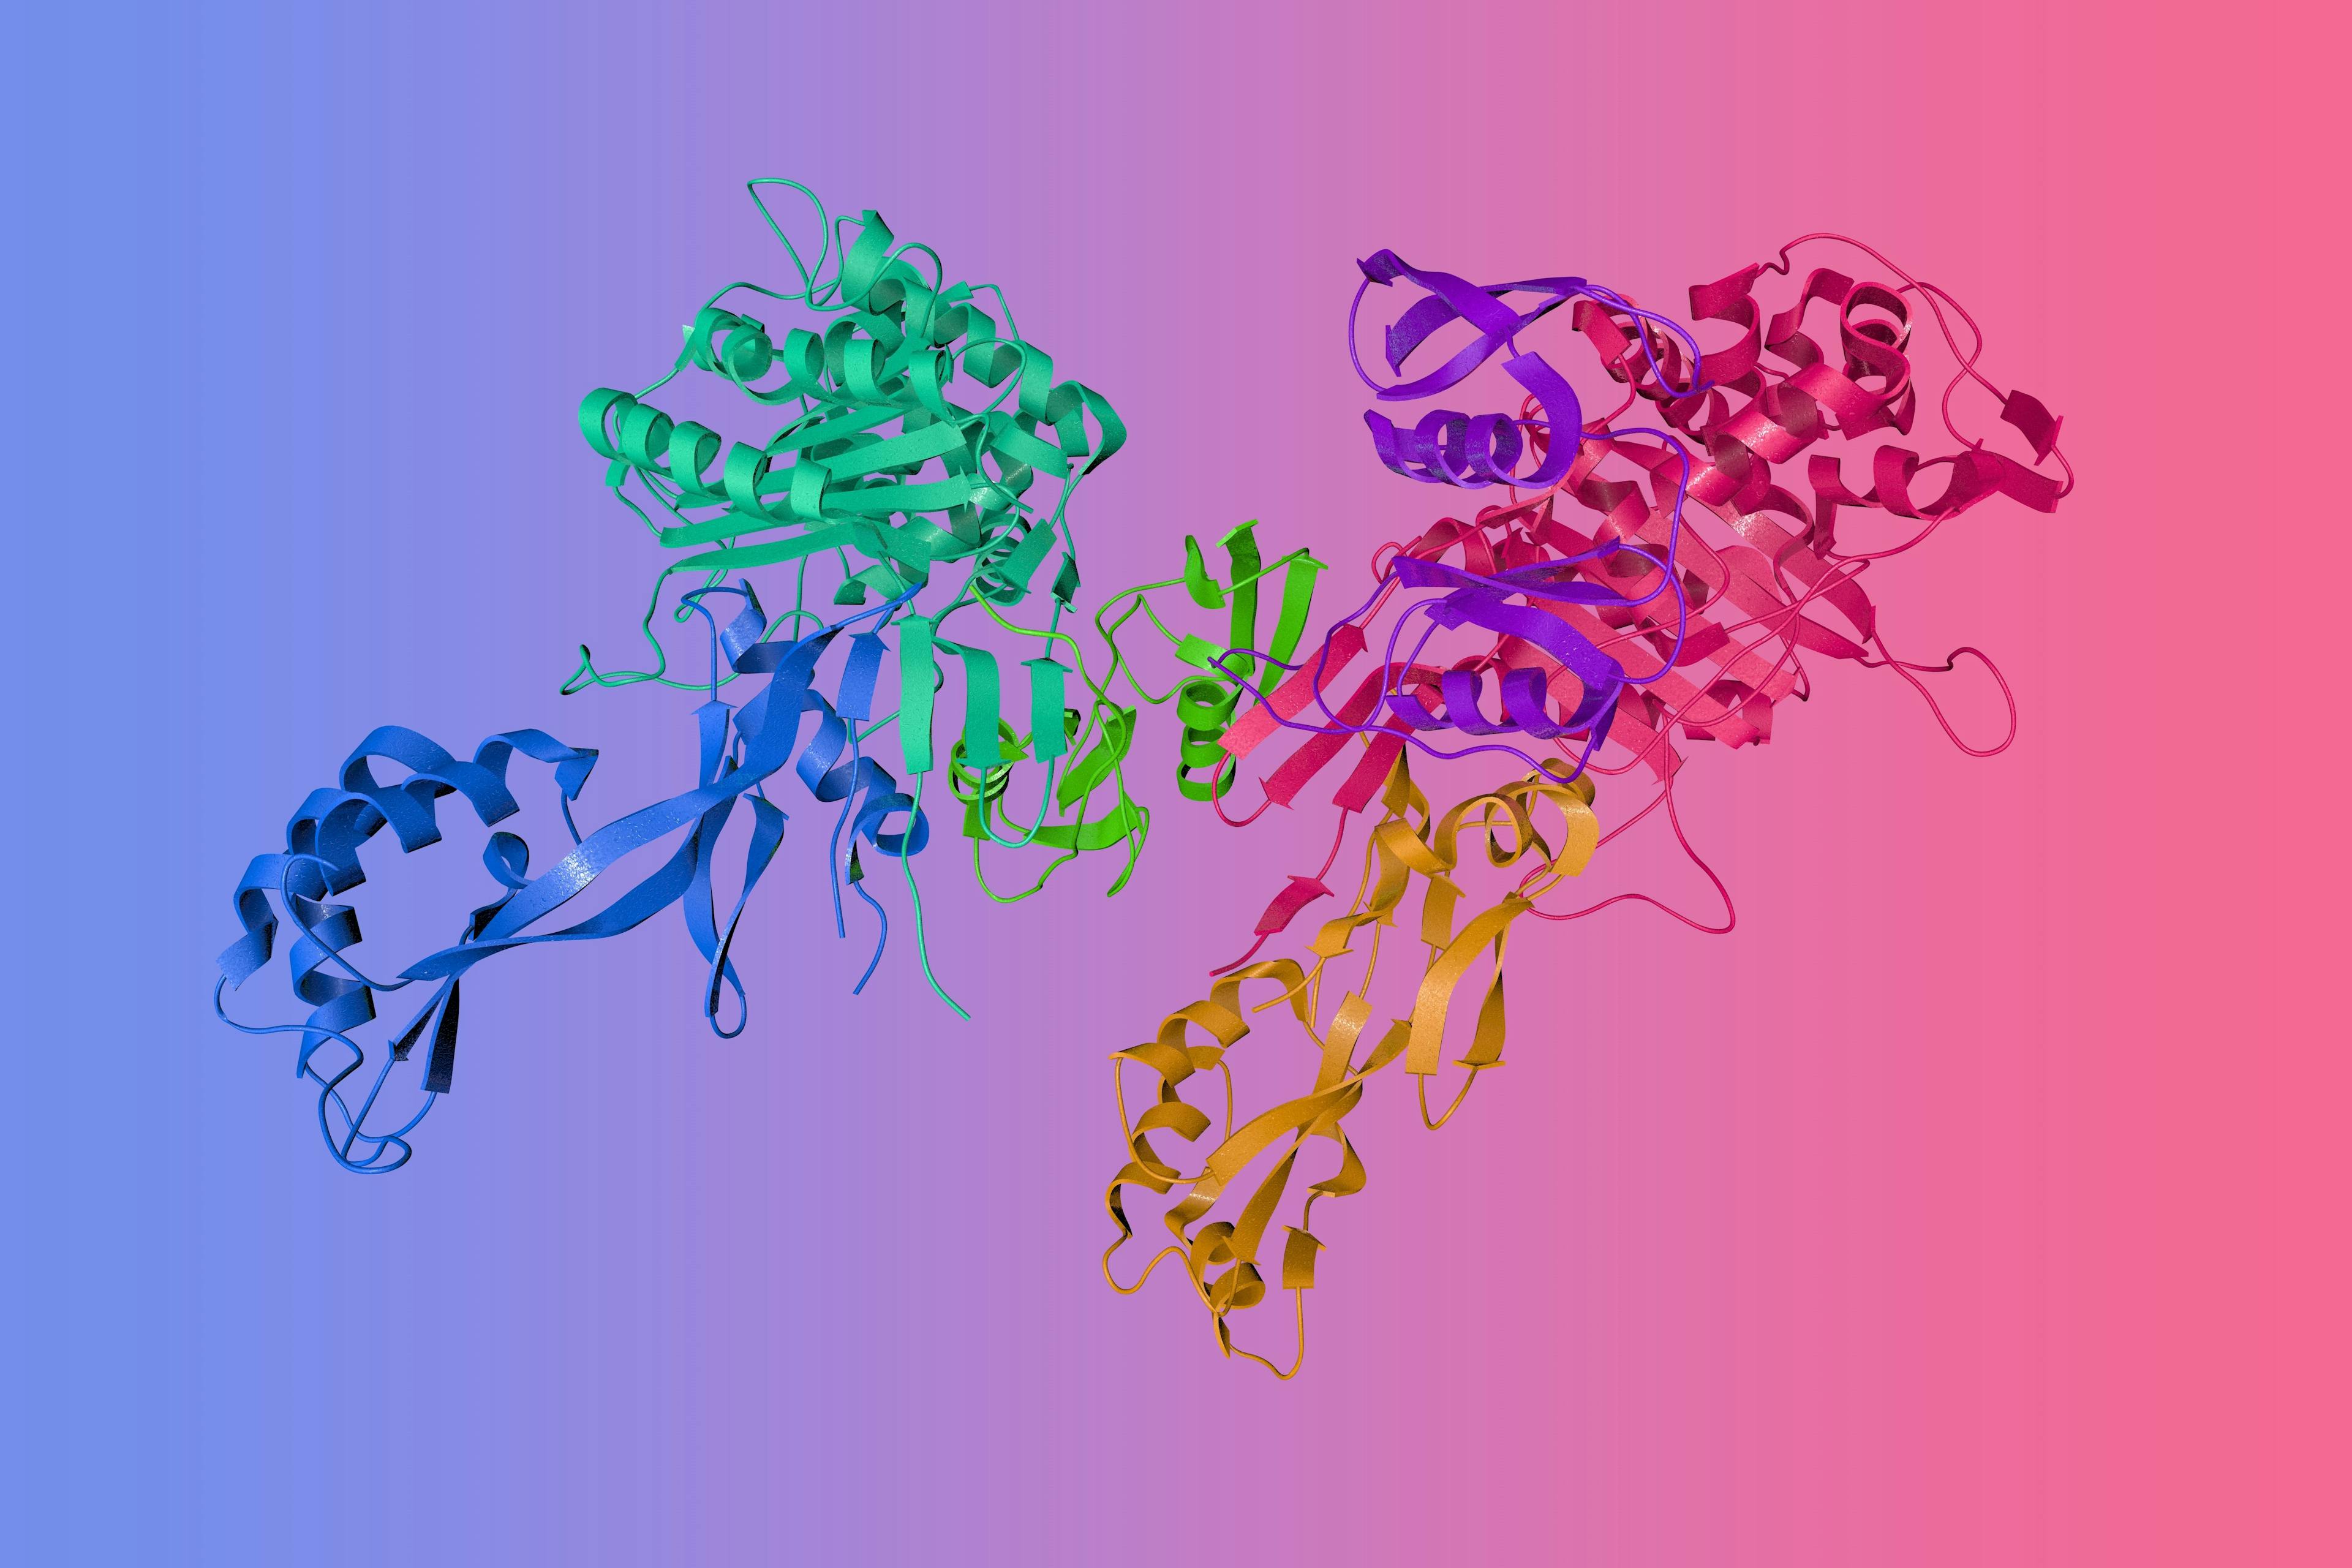 Penicillin-binding protein 2X acyl-enzyme complex from Streptococcus pneumoniae. Ribbons diagram with differently colored protein chains based on protein data bank entry 2zc3. 3d illustration | Image Credit: © Maryna Olyak - stock.adobe.com